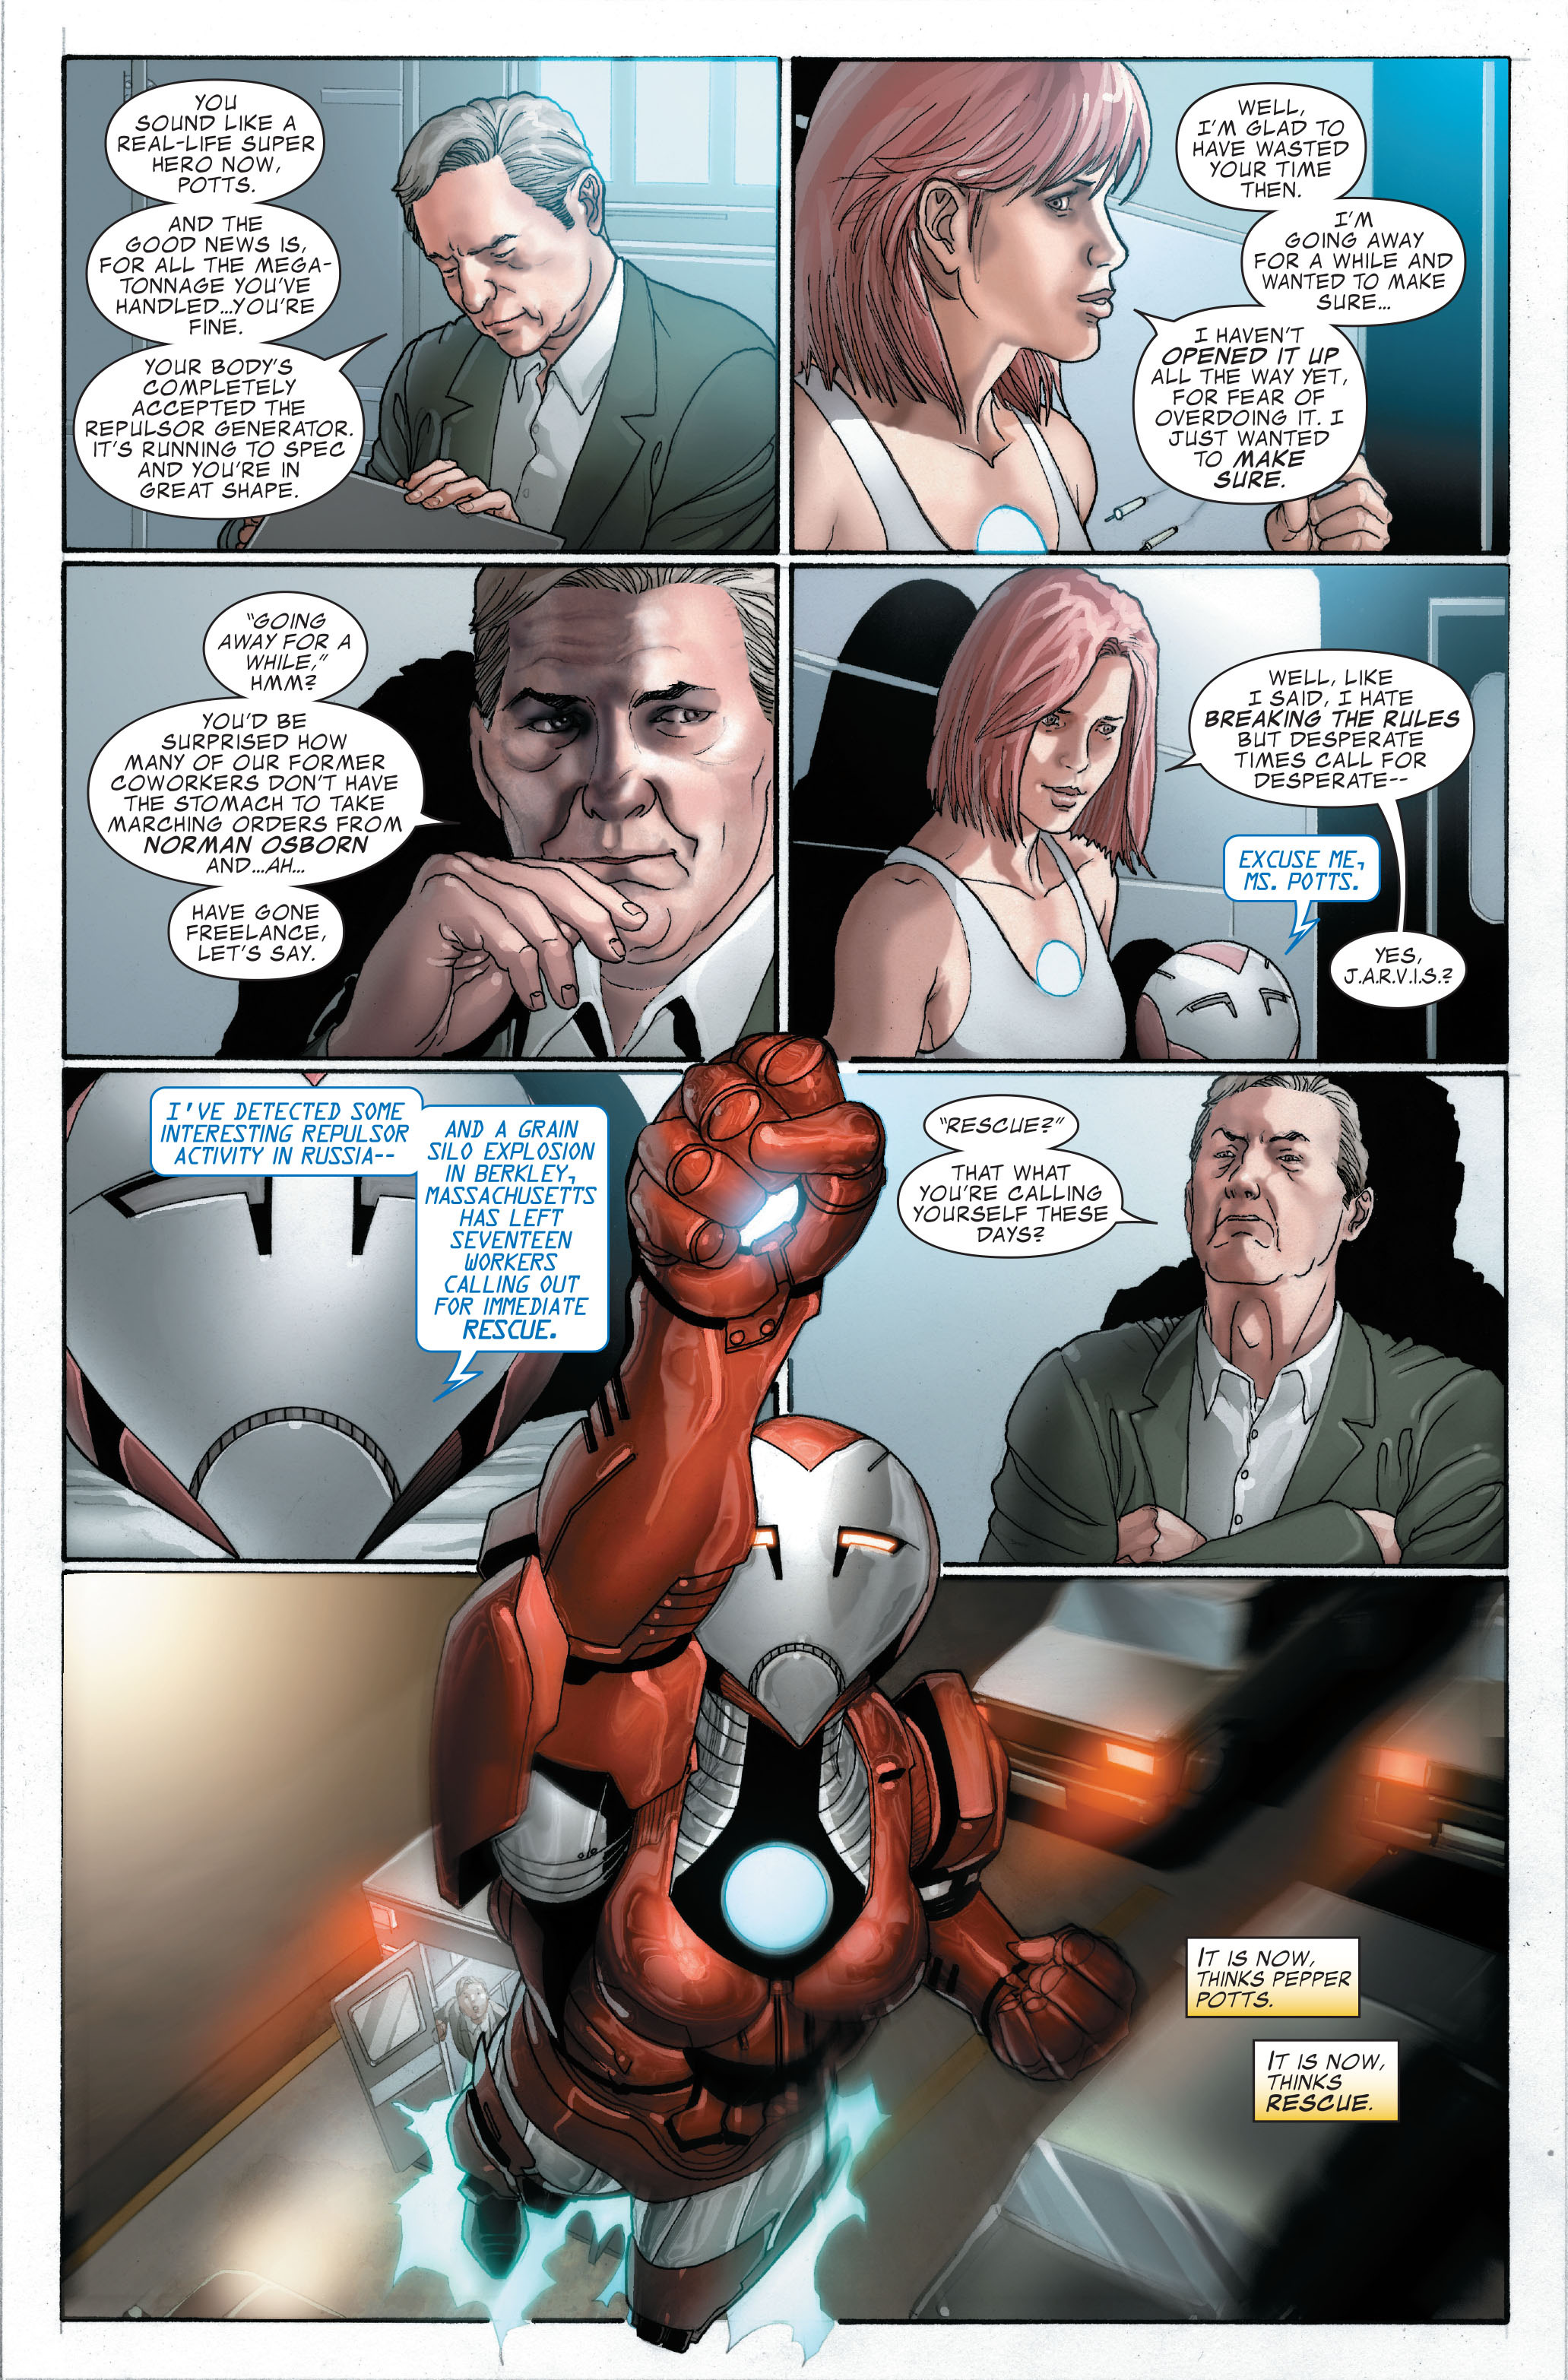 Invincible Iron Man (2008) 14 Page 11